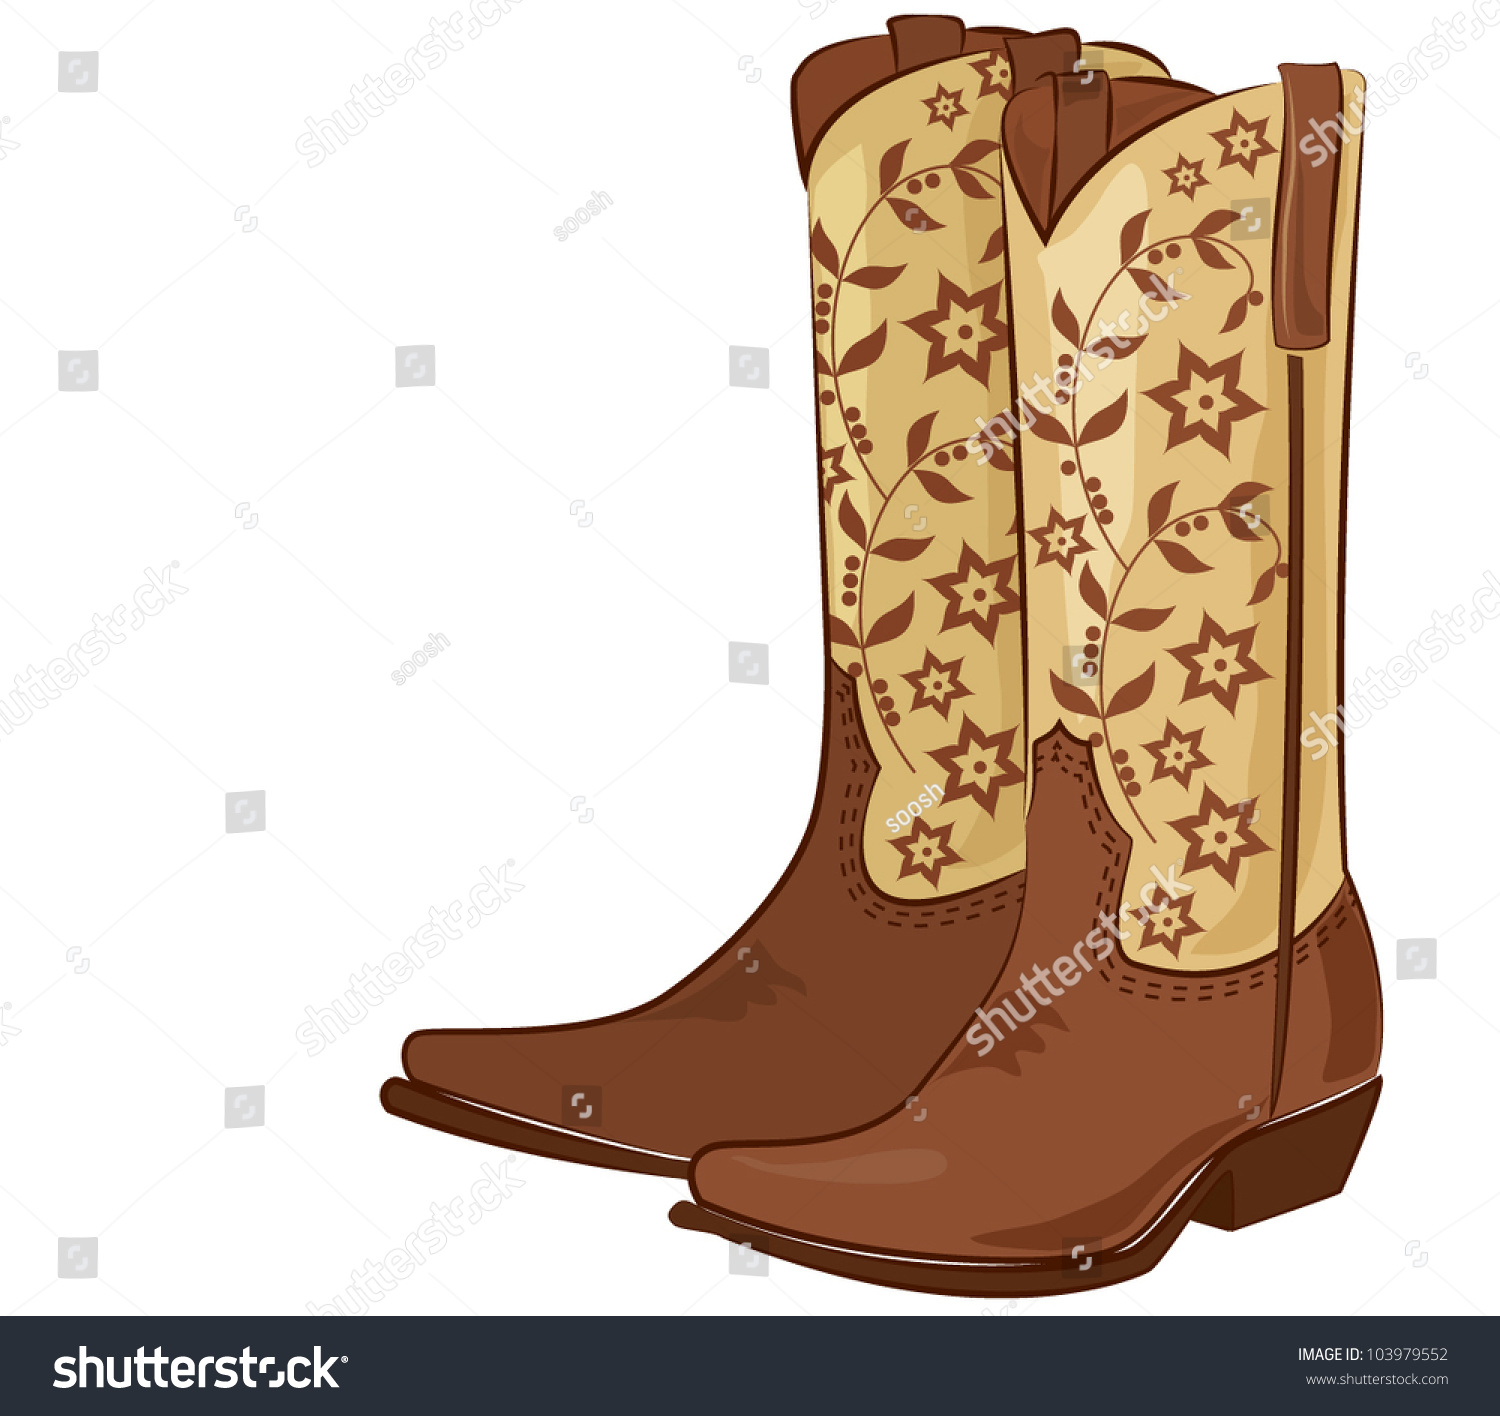 Vector Illustration Of A Pair Of Cowboy Boots - 103979552 : Shutterstock